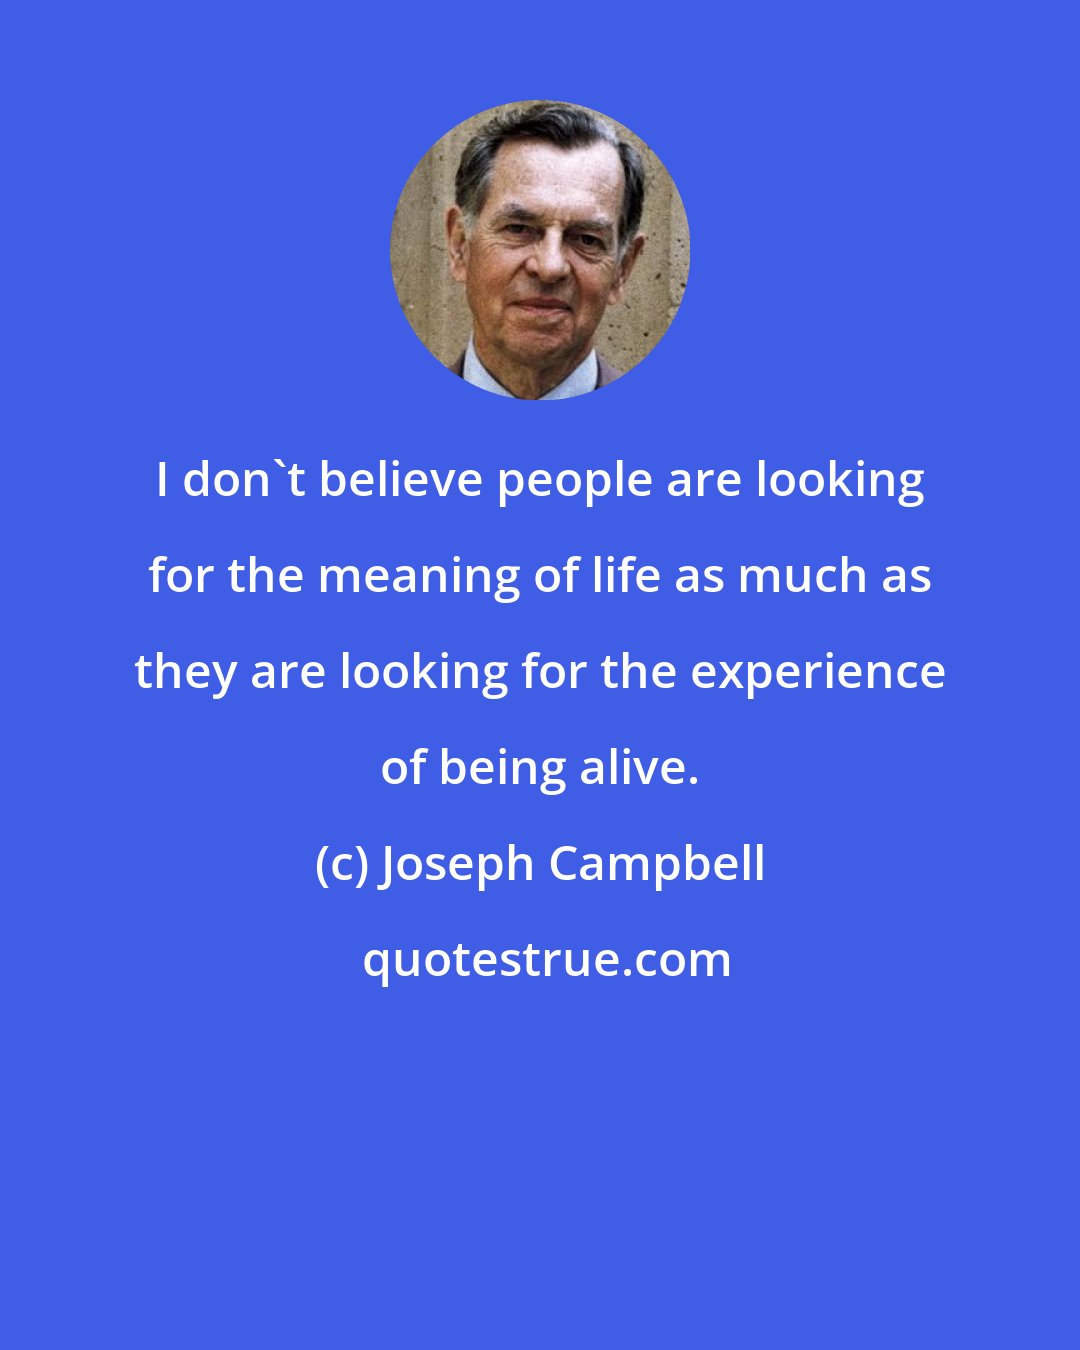 Joseph Campbell: I don't believe people are looking for the meaning of life as much as they are looking for the experience of being alive.